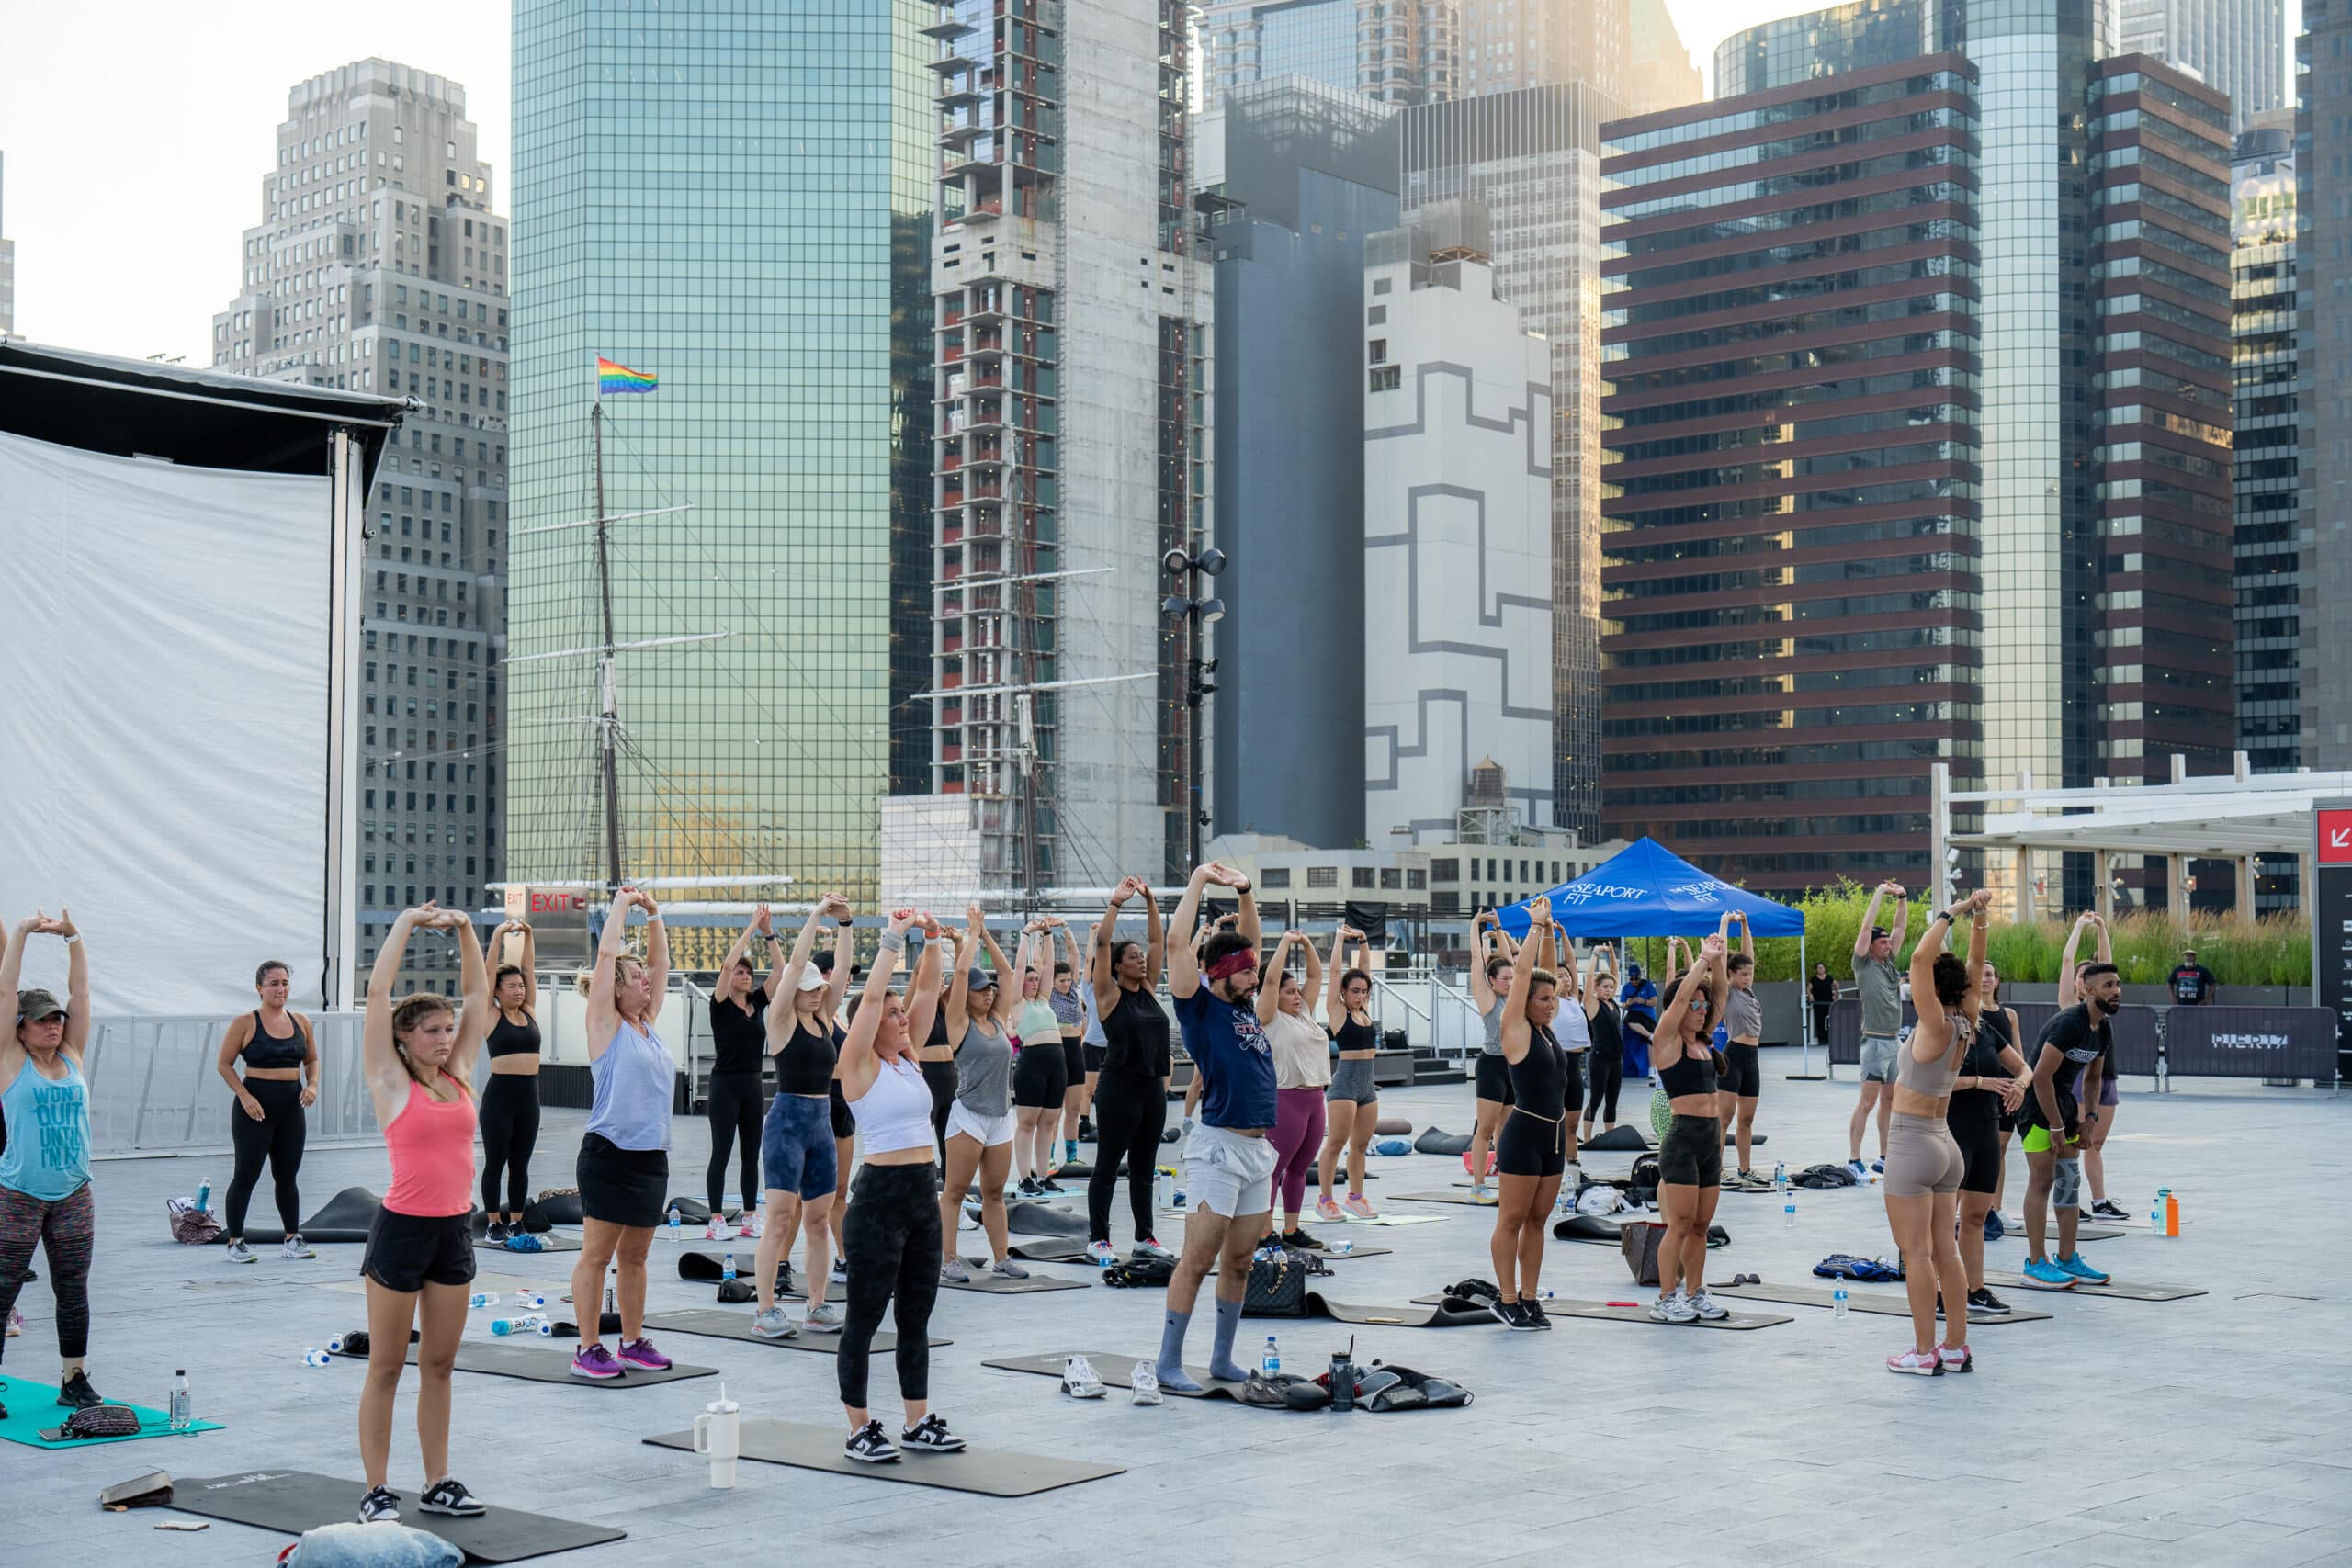 Rachel Fitness class on the Rooftop at Pier 17